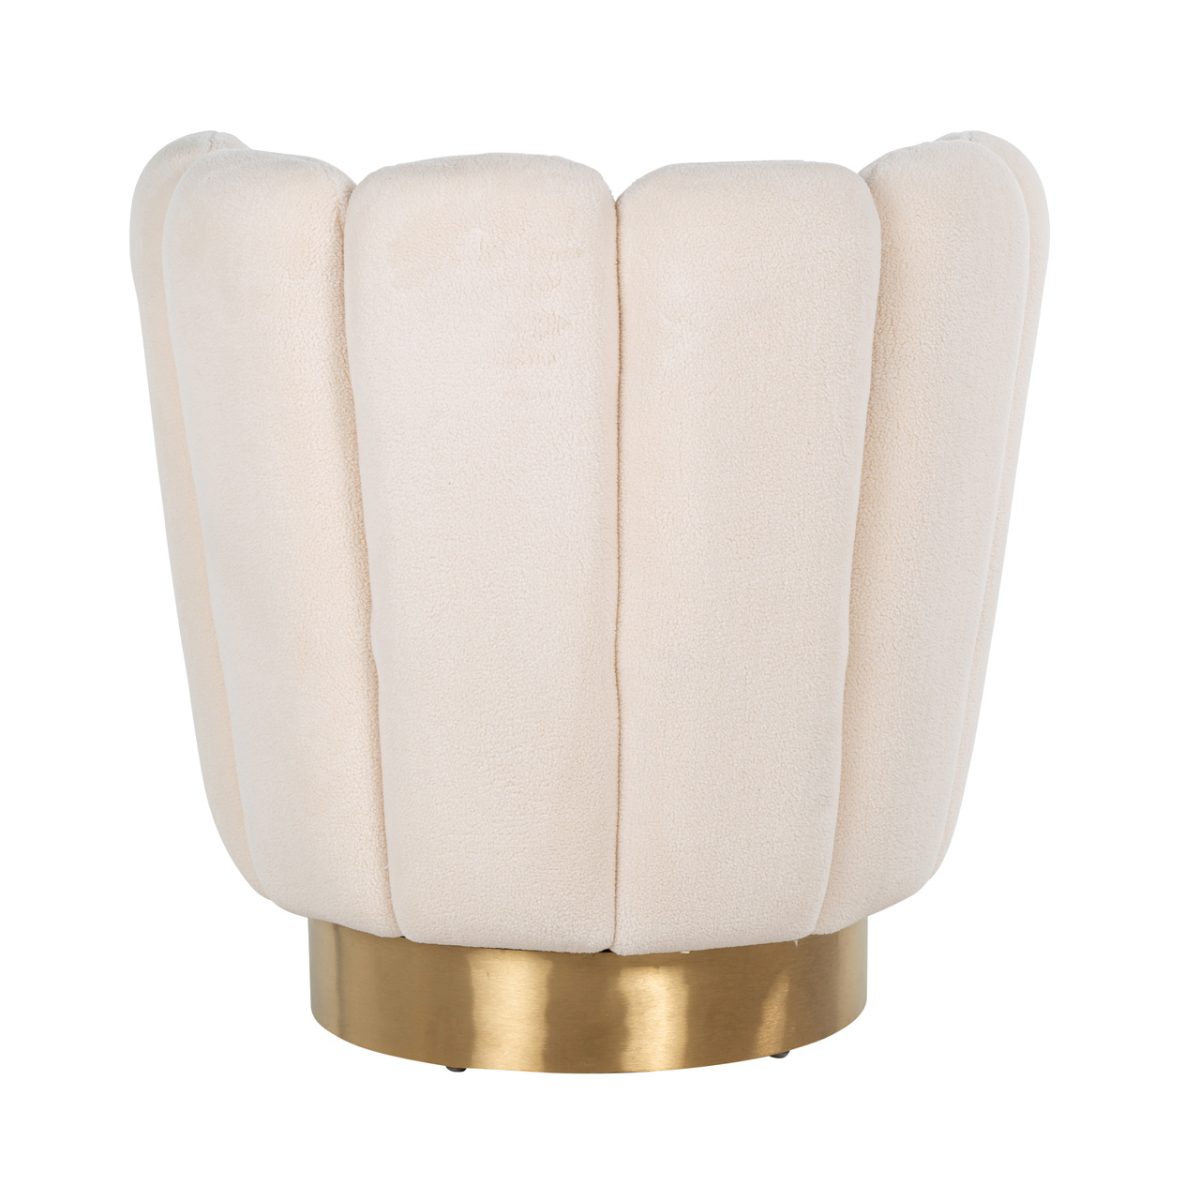 S4487 WHITE - Fauteuil Mayfair White teddy / Brushed gold ()